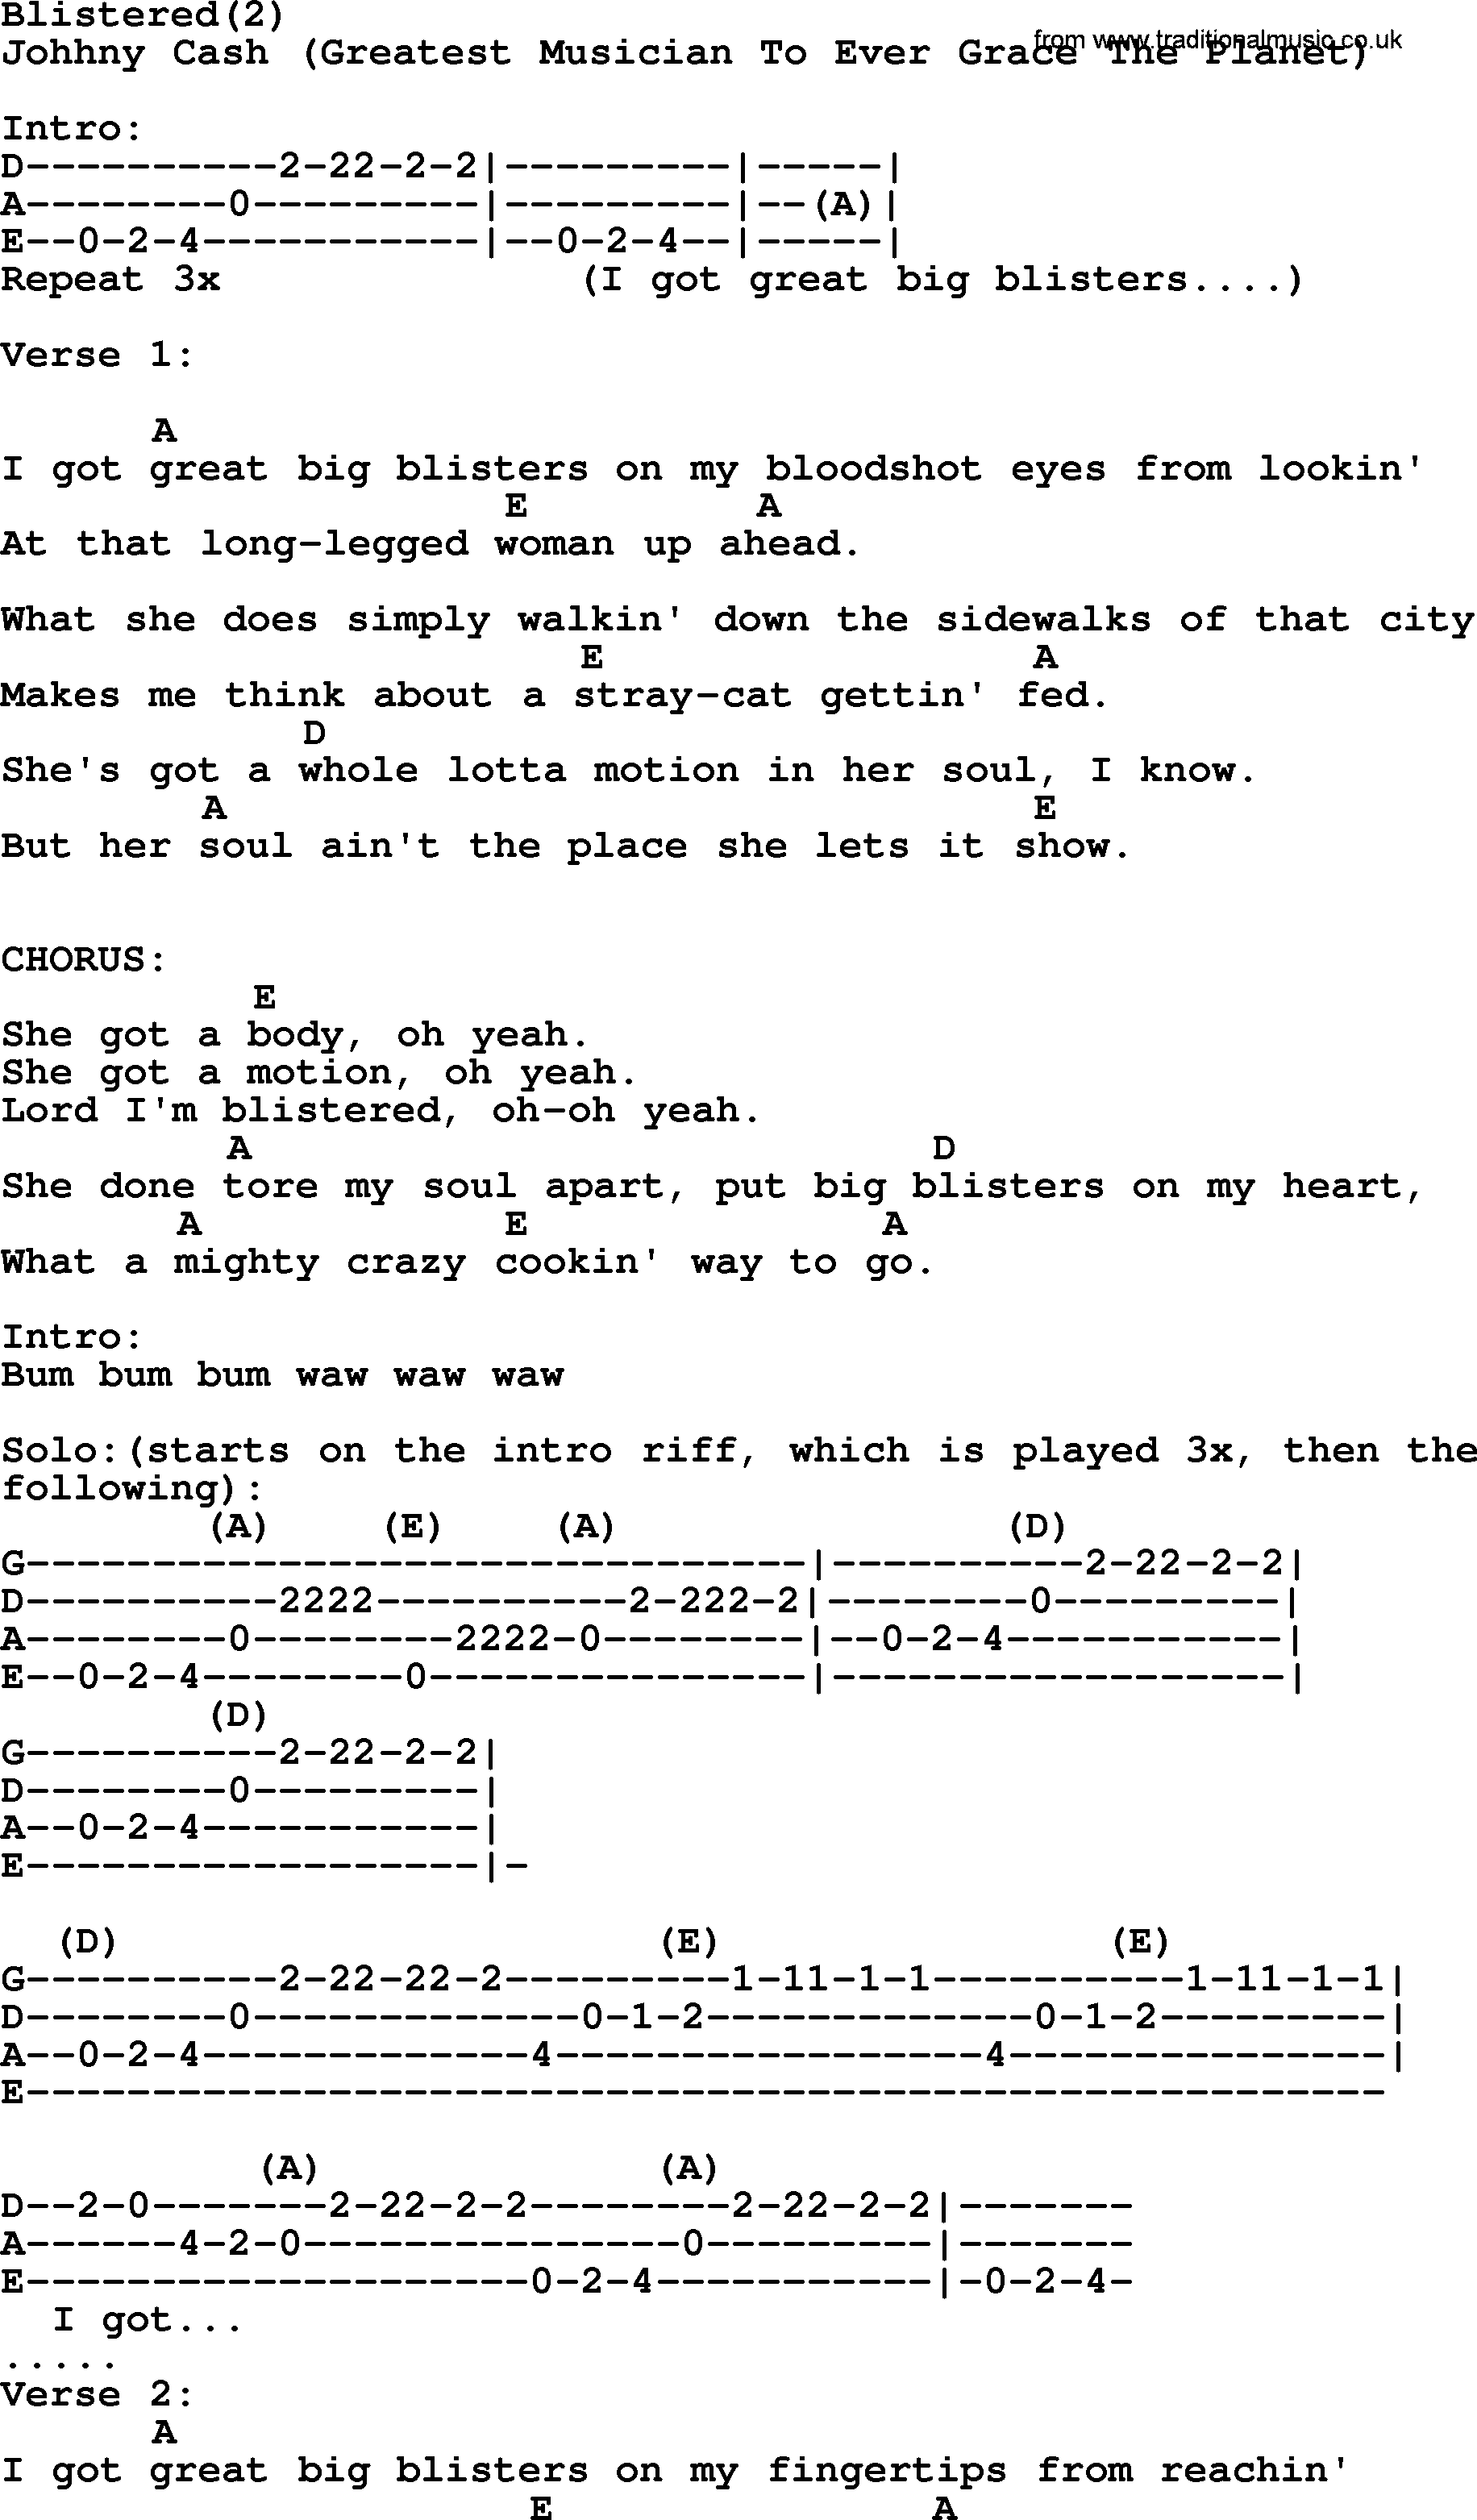 Johnny Cash song Blistered(2), lyrics and chords